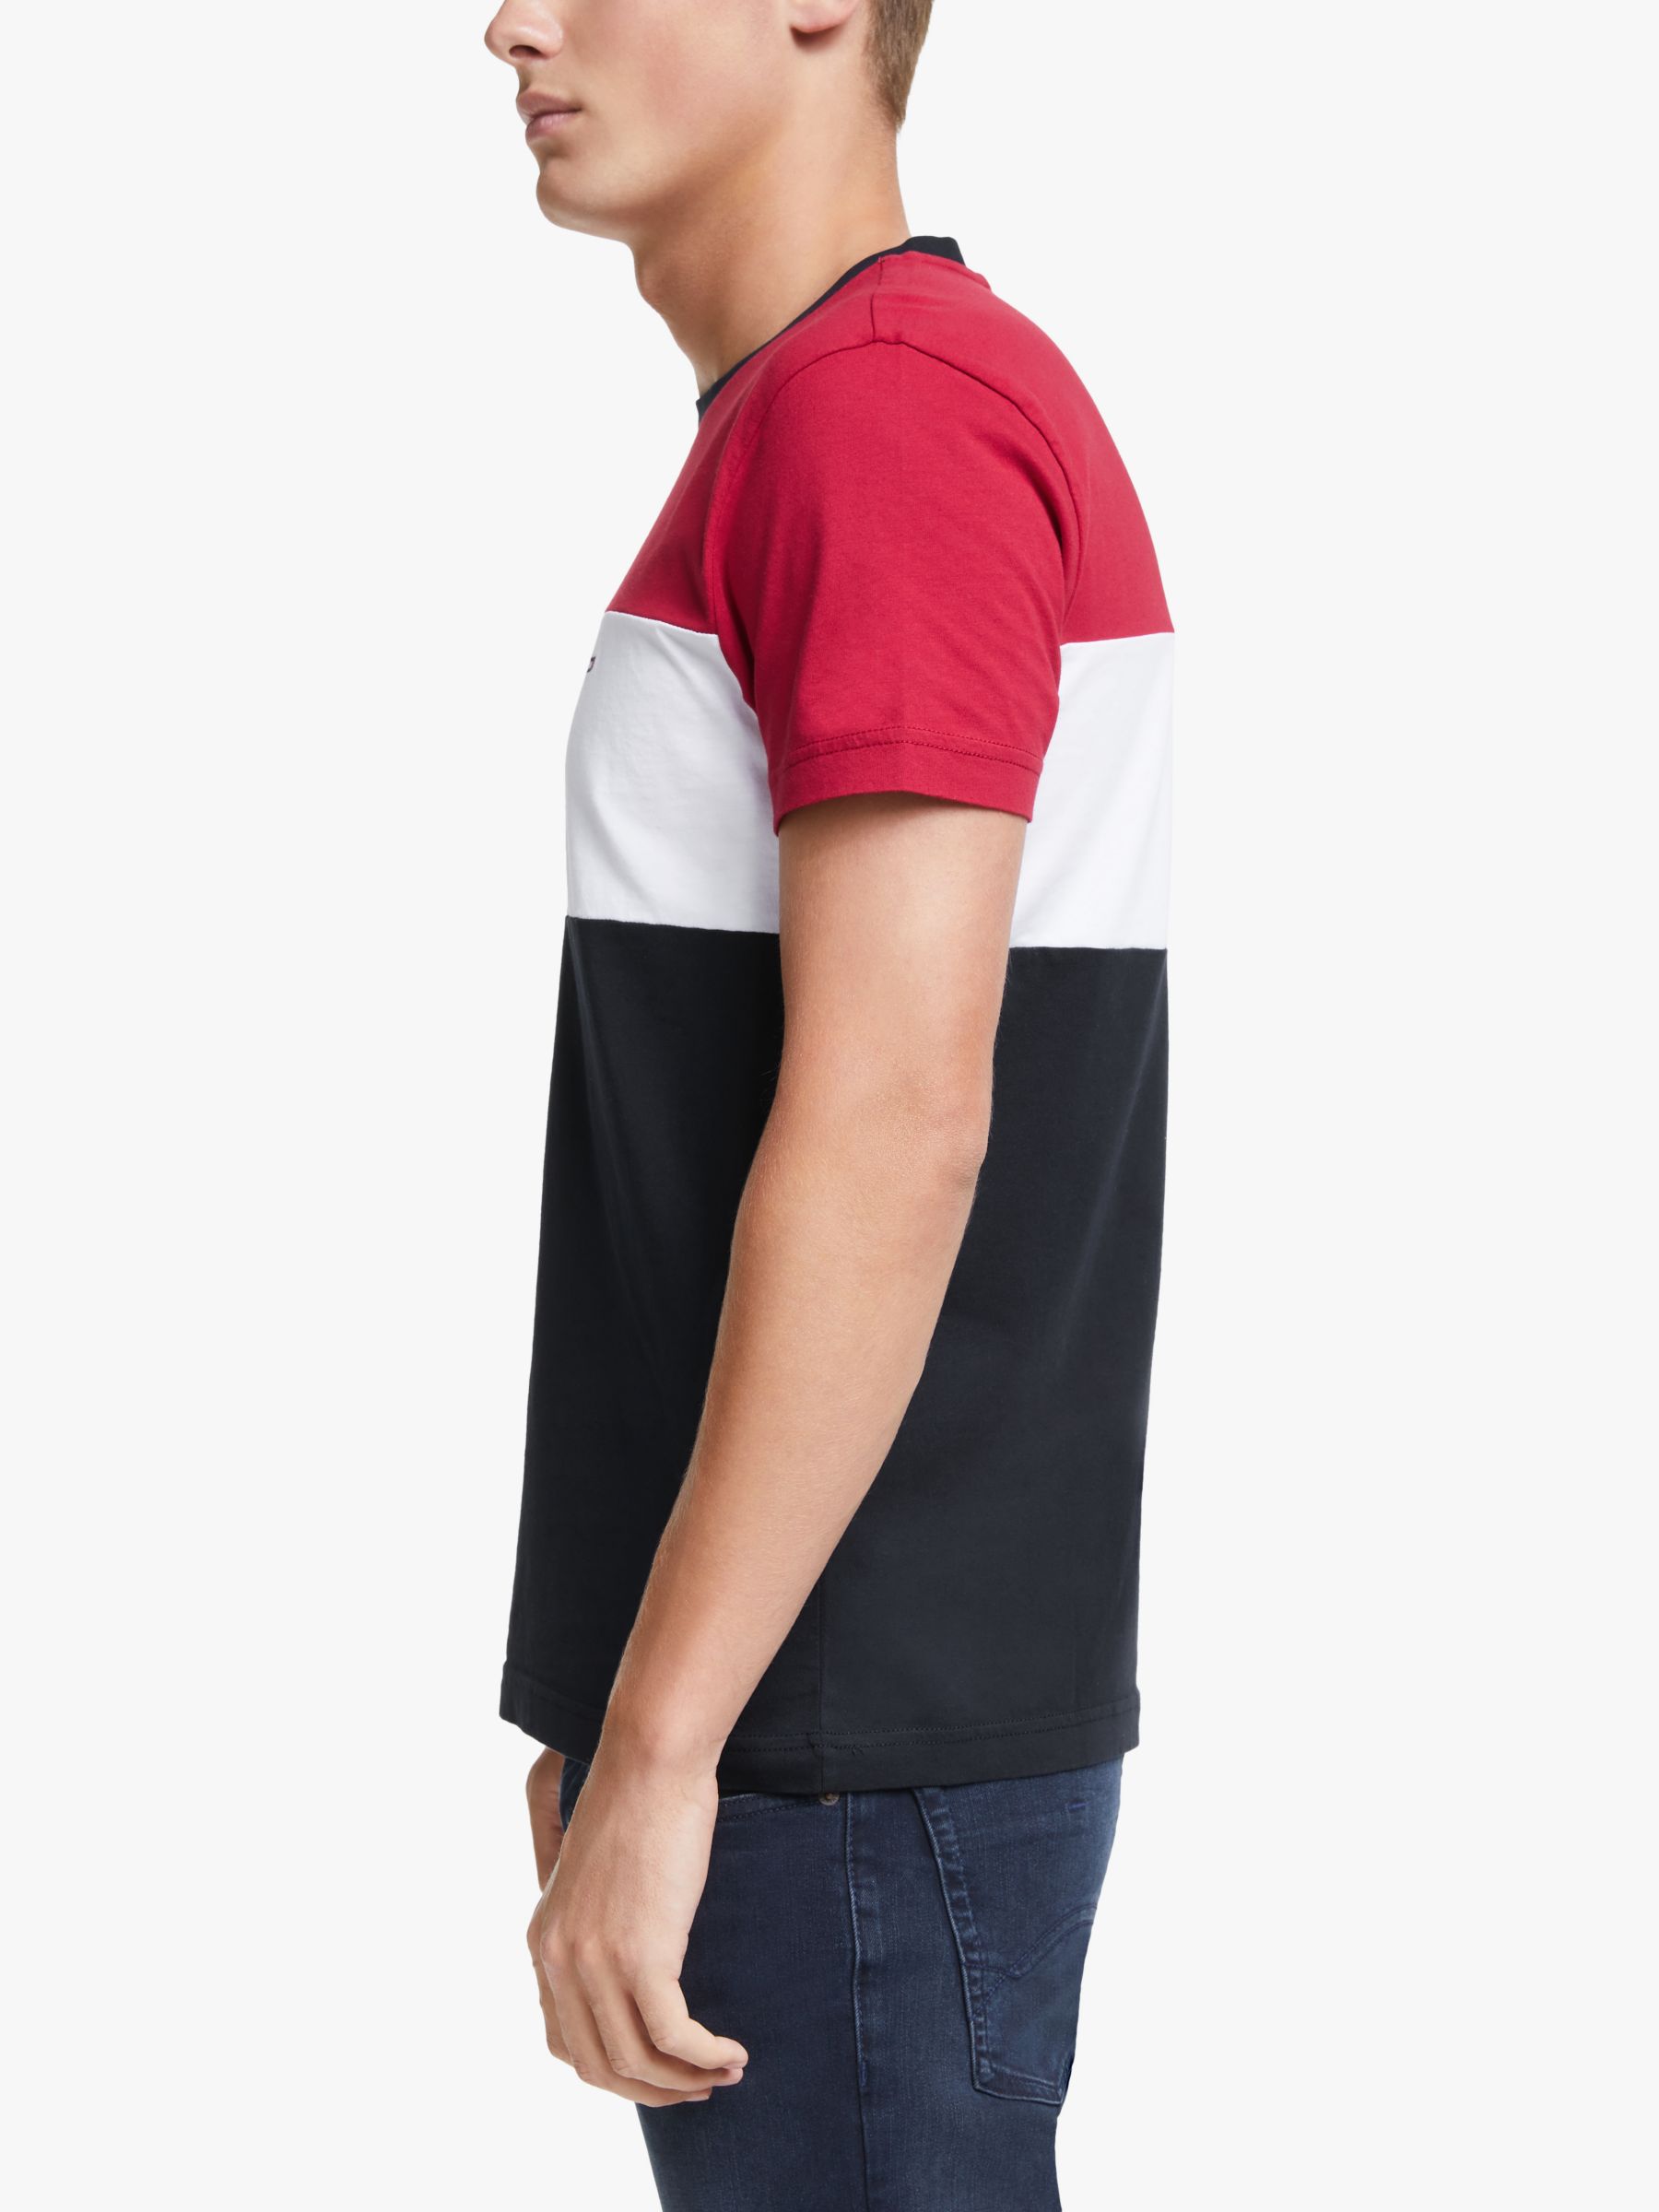 MENS TOMMY HILFIGER COLOUR BLOCK NAVY//RED T-SHIRT PA1 RRP £44.99